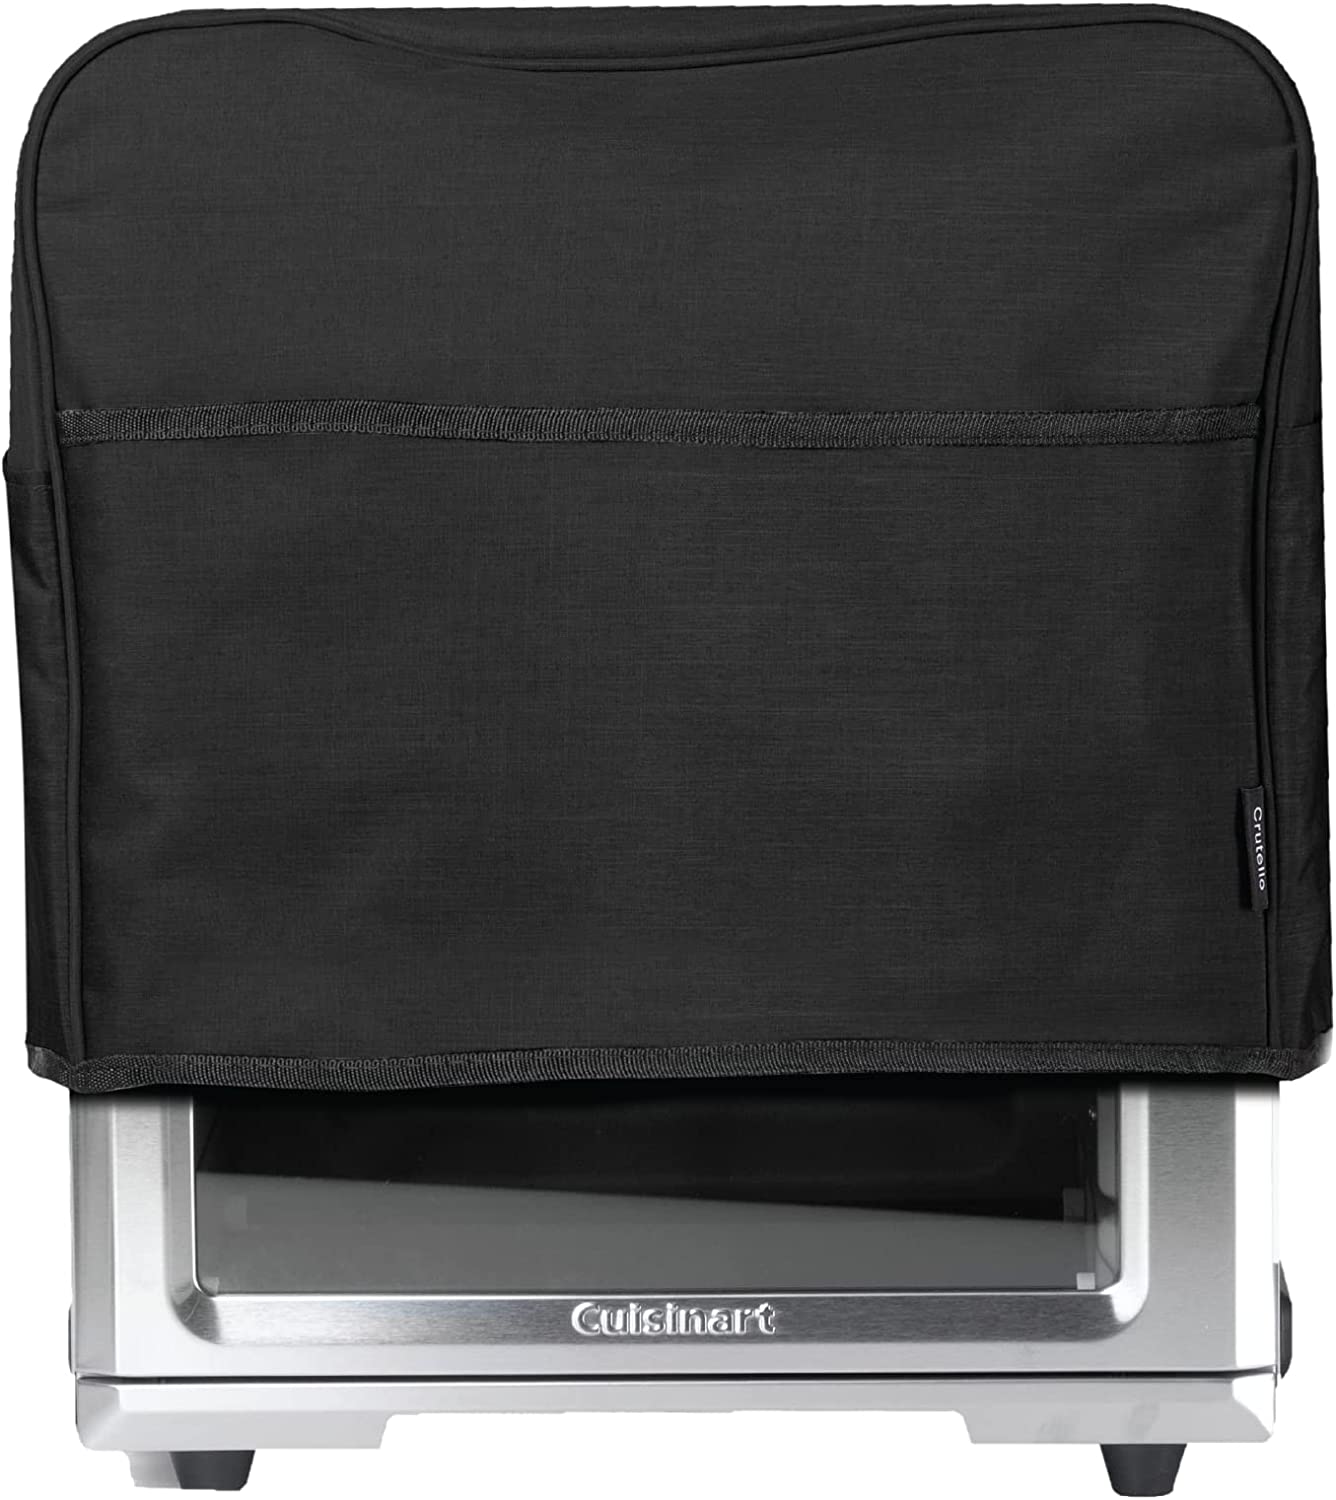 Convection Toaster Oven Appliance Cover with Storage Pockets, Large - Fits Machines Up to 17 x 15 x 14 Inches - Black